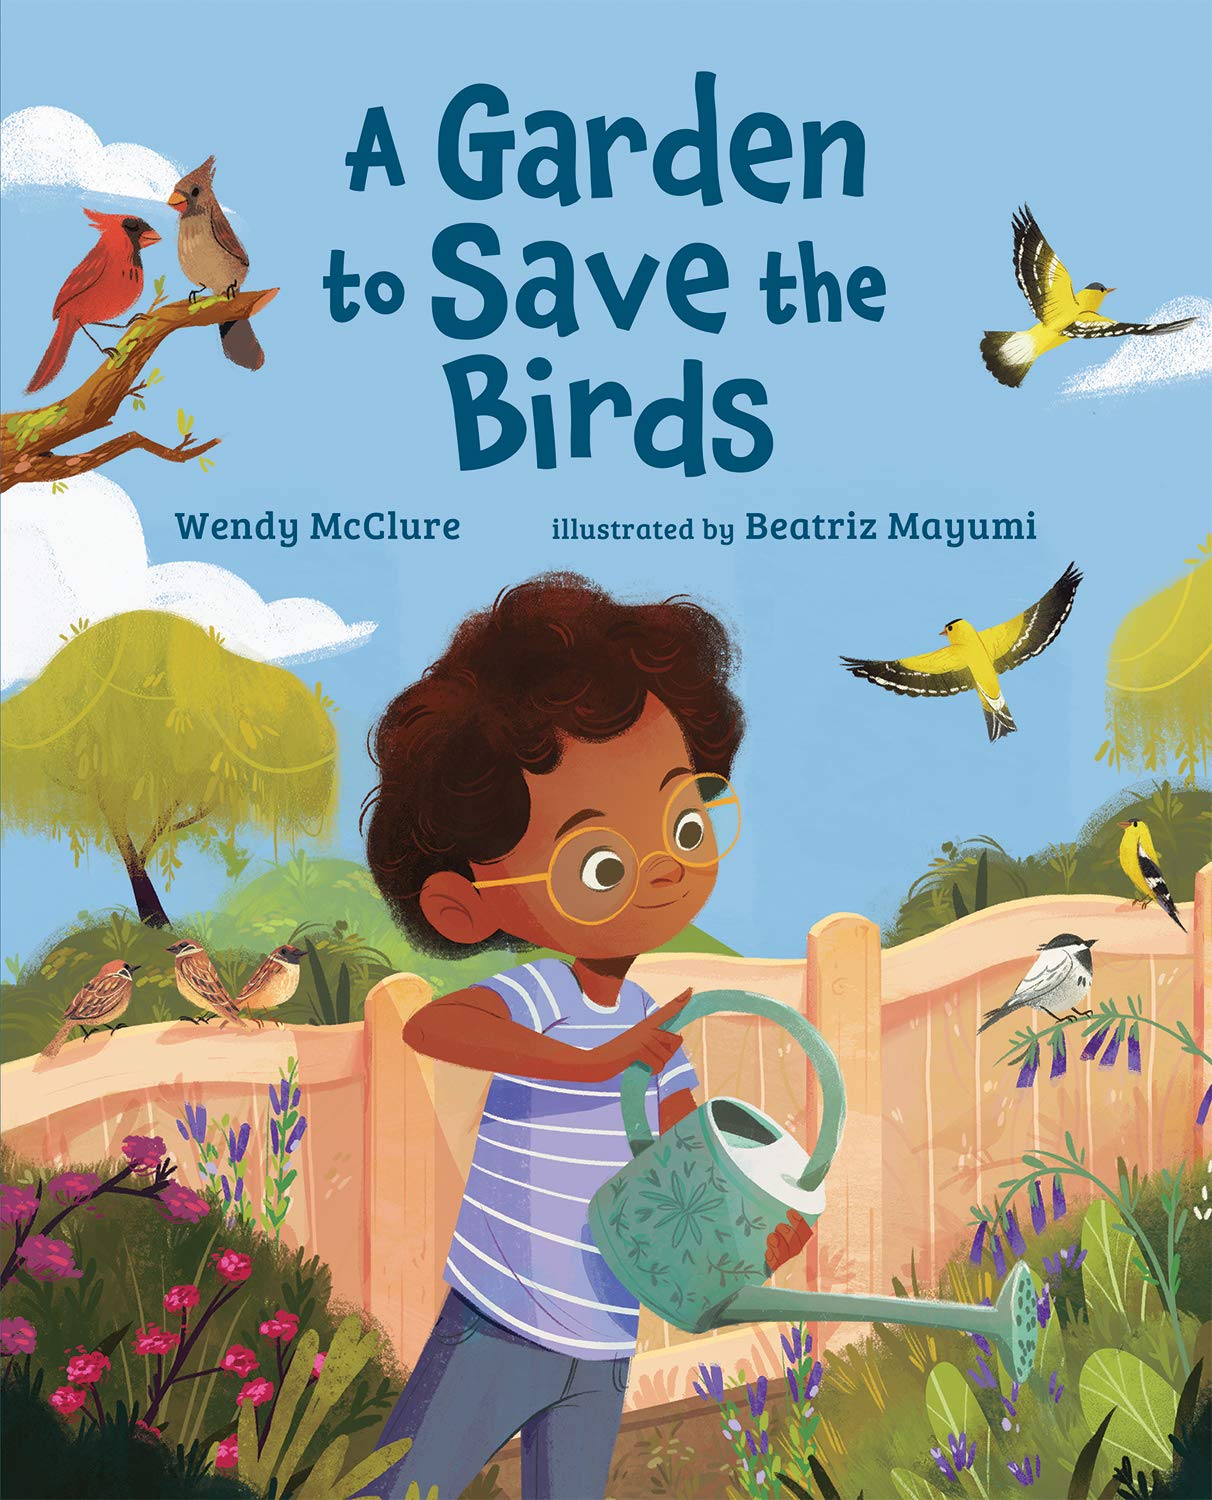 image for "A Garden to Save the Birds"